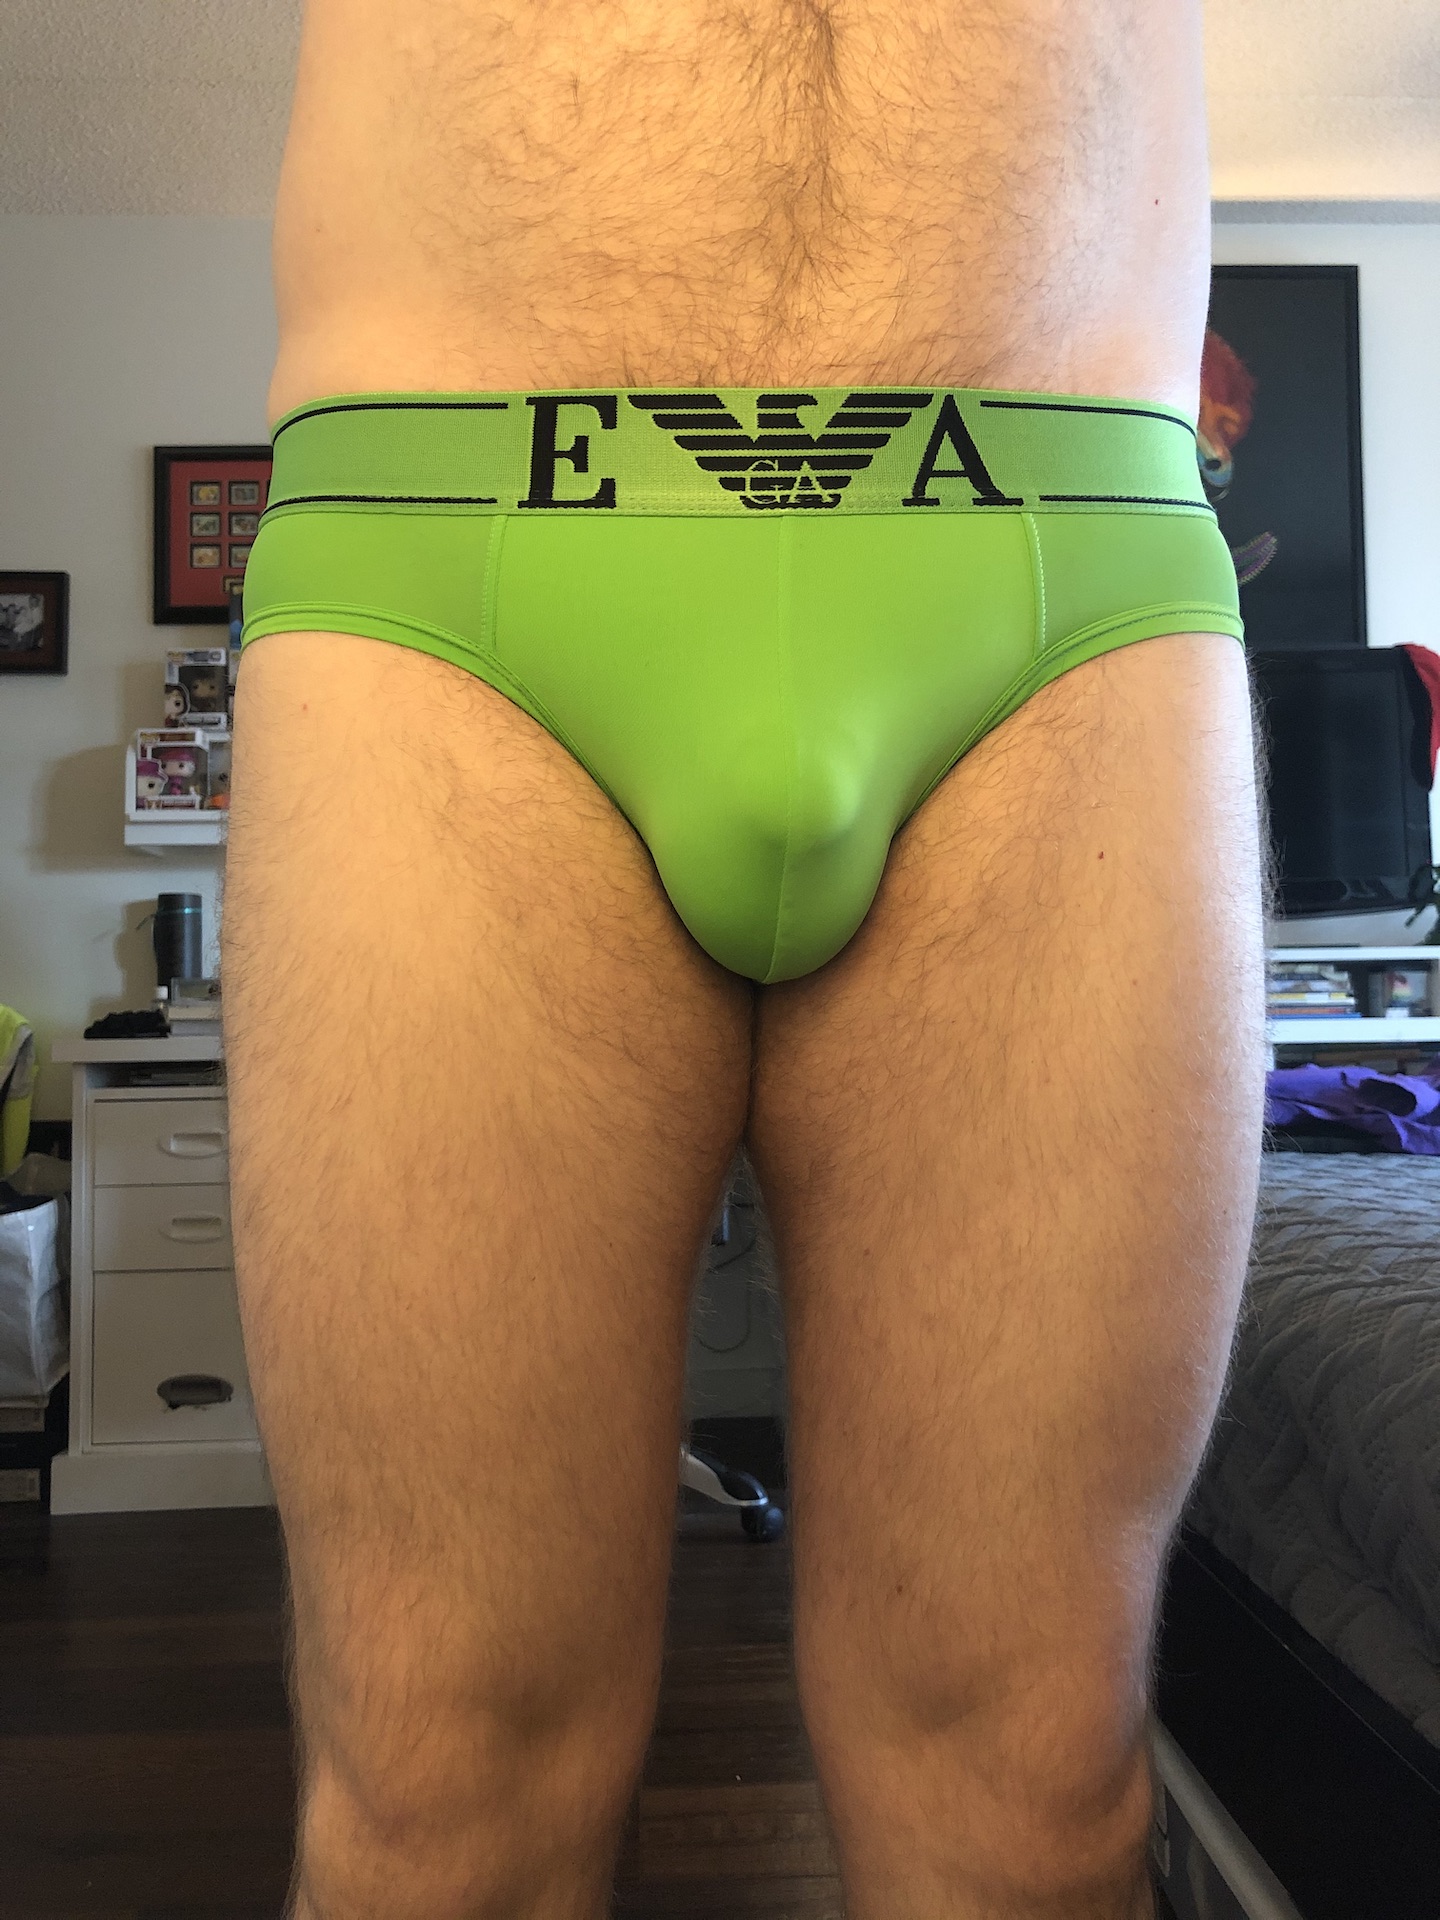 Bright Green EA briefs for another distanced Friday…